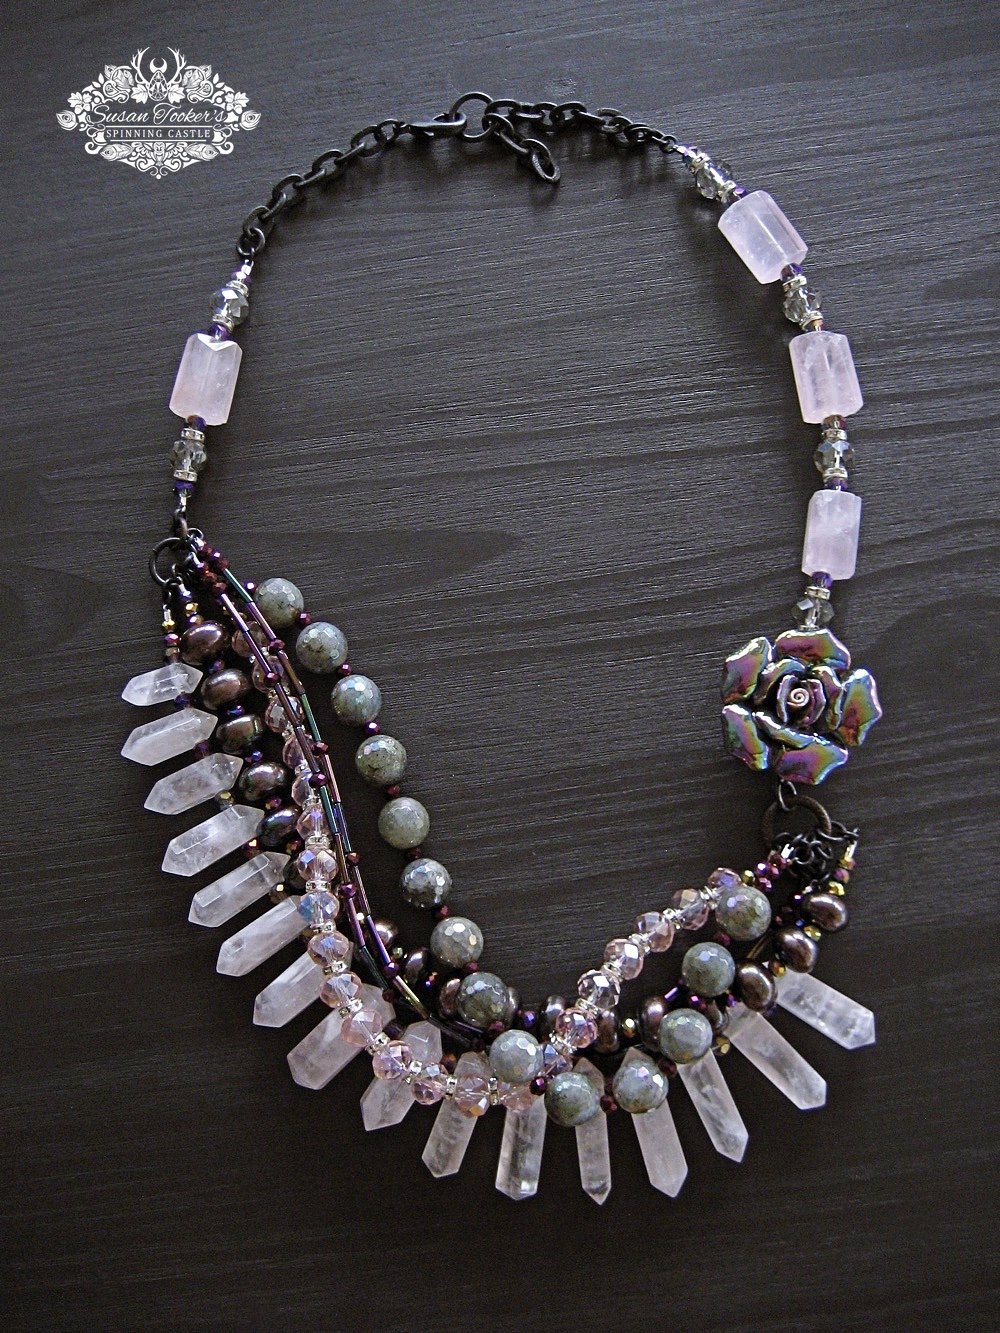 Image of SHINING ONE Rose Quartz Crystal Points Labradorite Pearl Asymmetrical Statement Necklace Boho Witchy